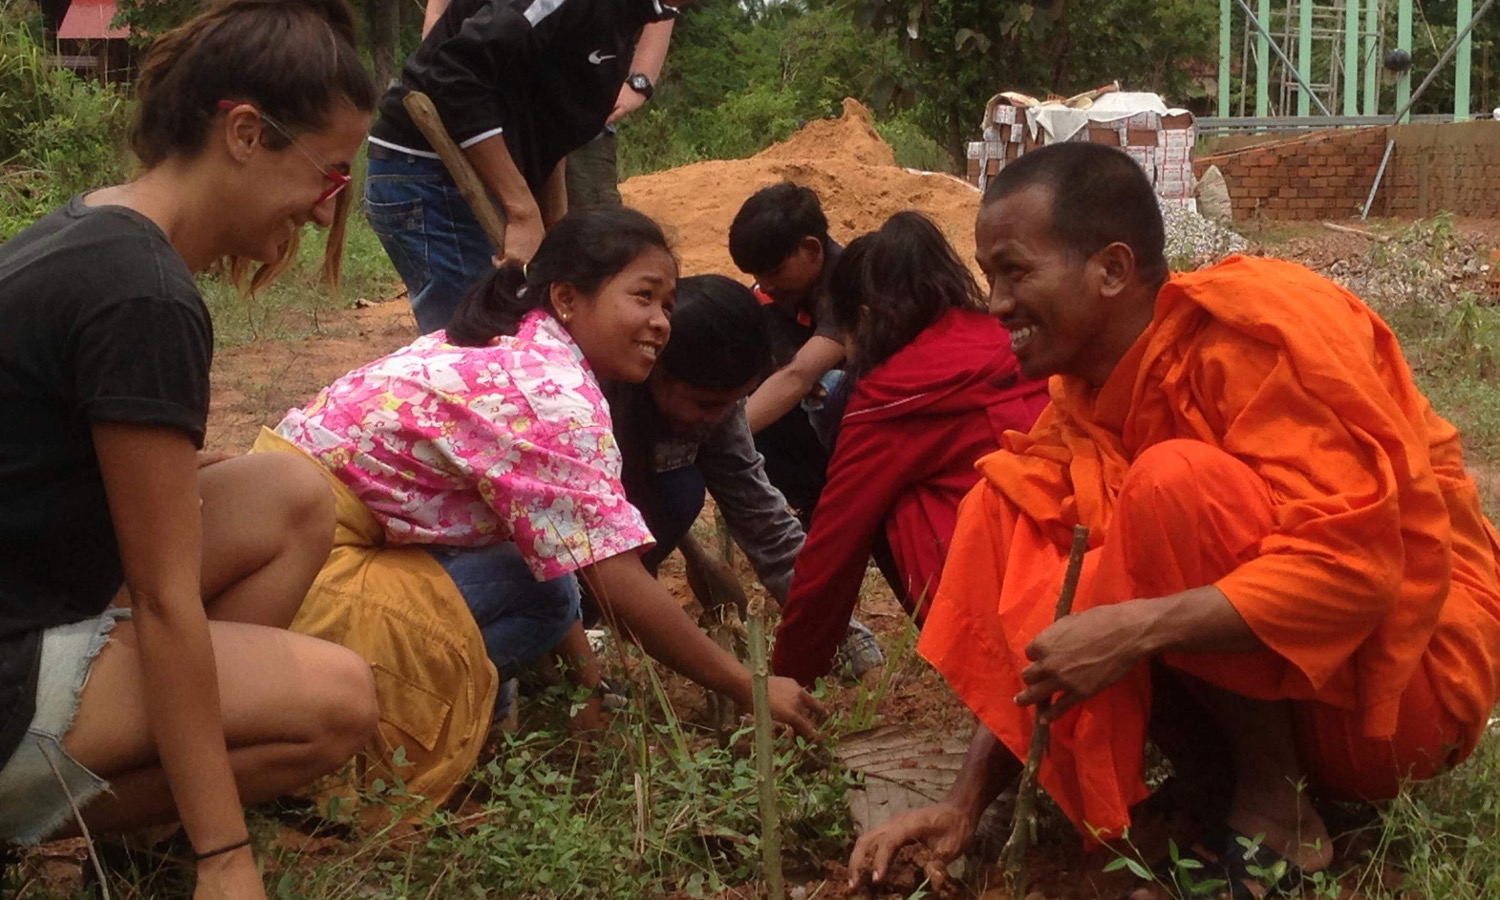 The Green Shoots Foundation agri-tech center is providing practical vocational training in agriculture to youth in rural Cambodia.